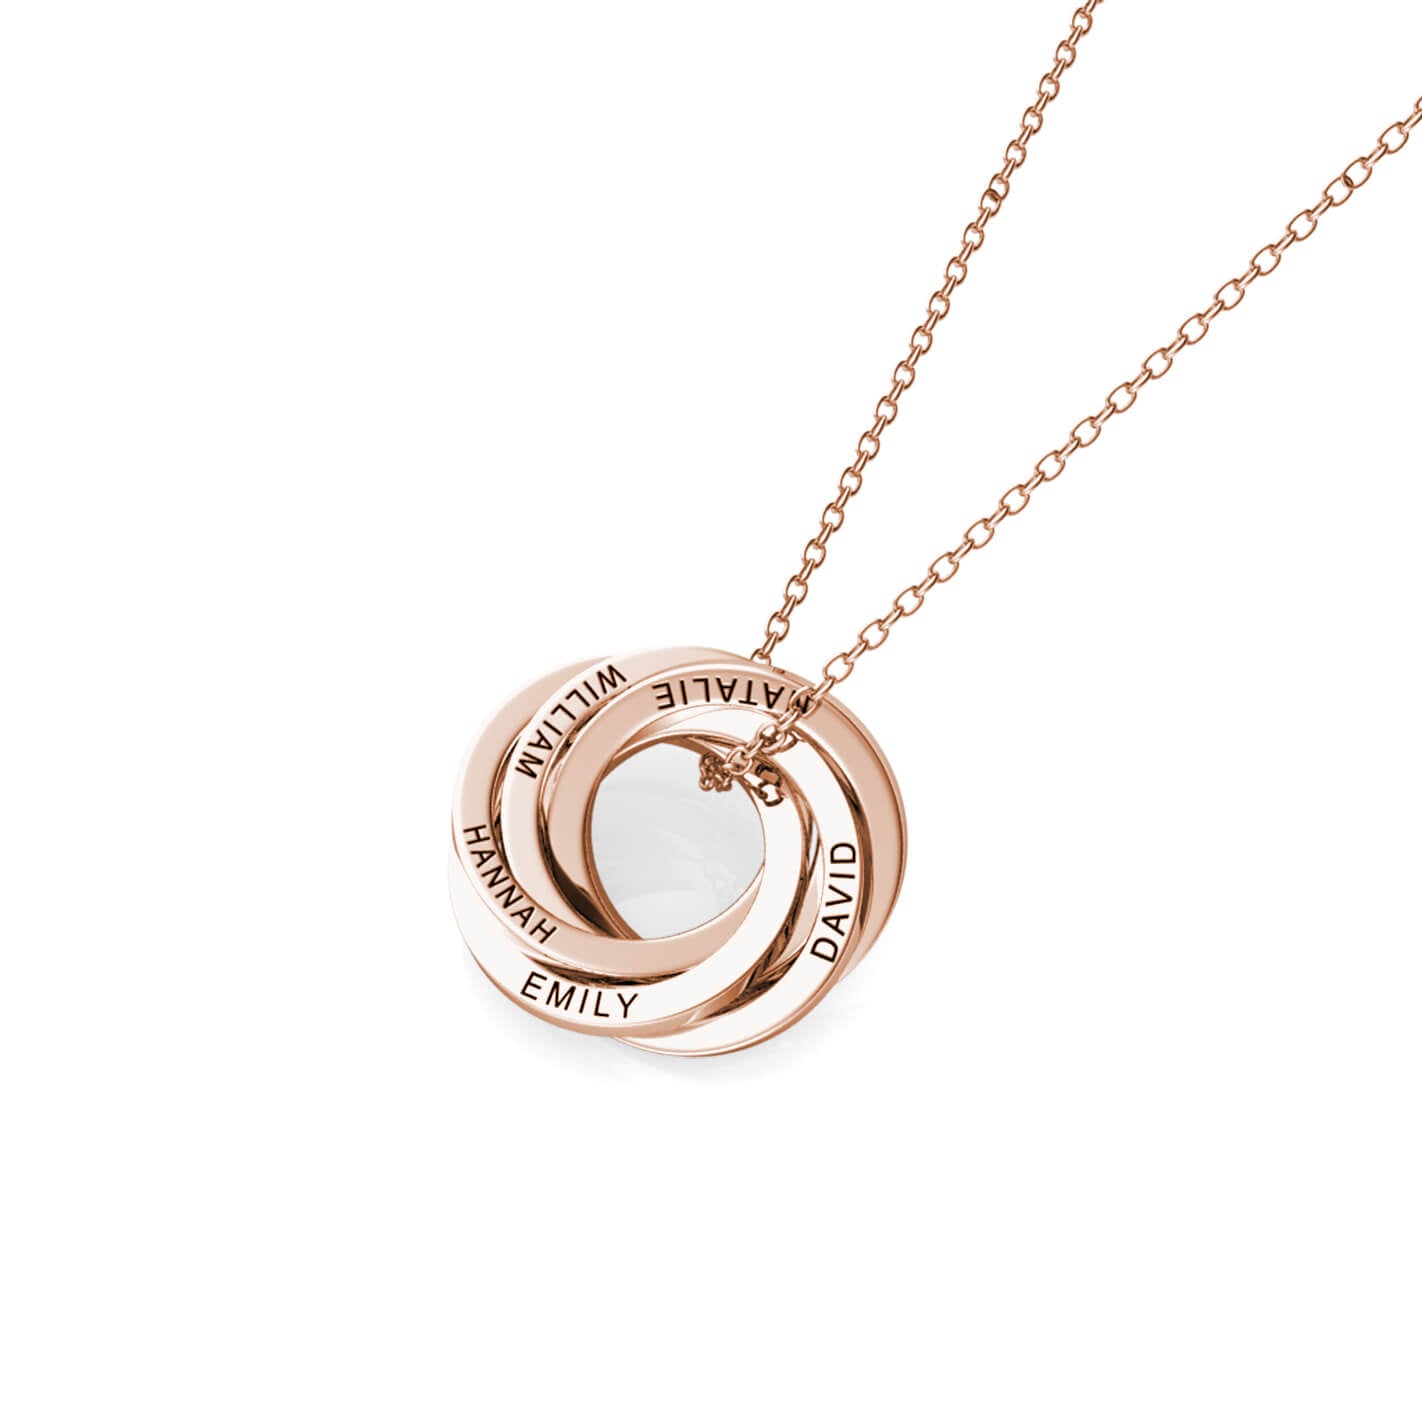 Personalised Russian 5 Rings Engraved Necklace for Grandma & Mum